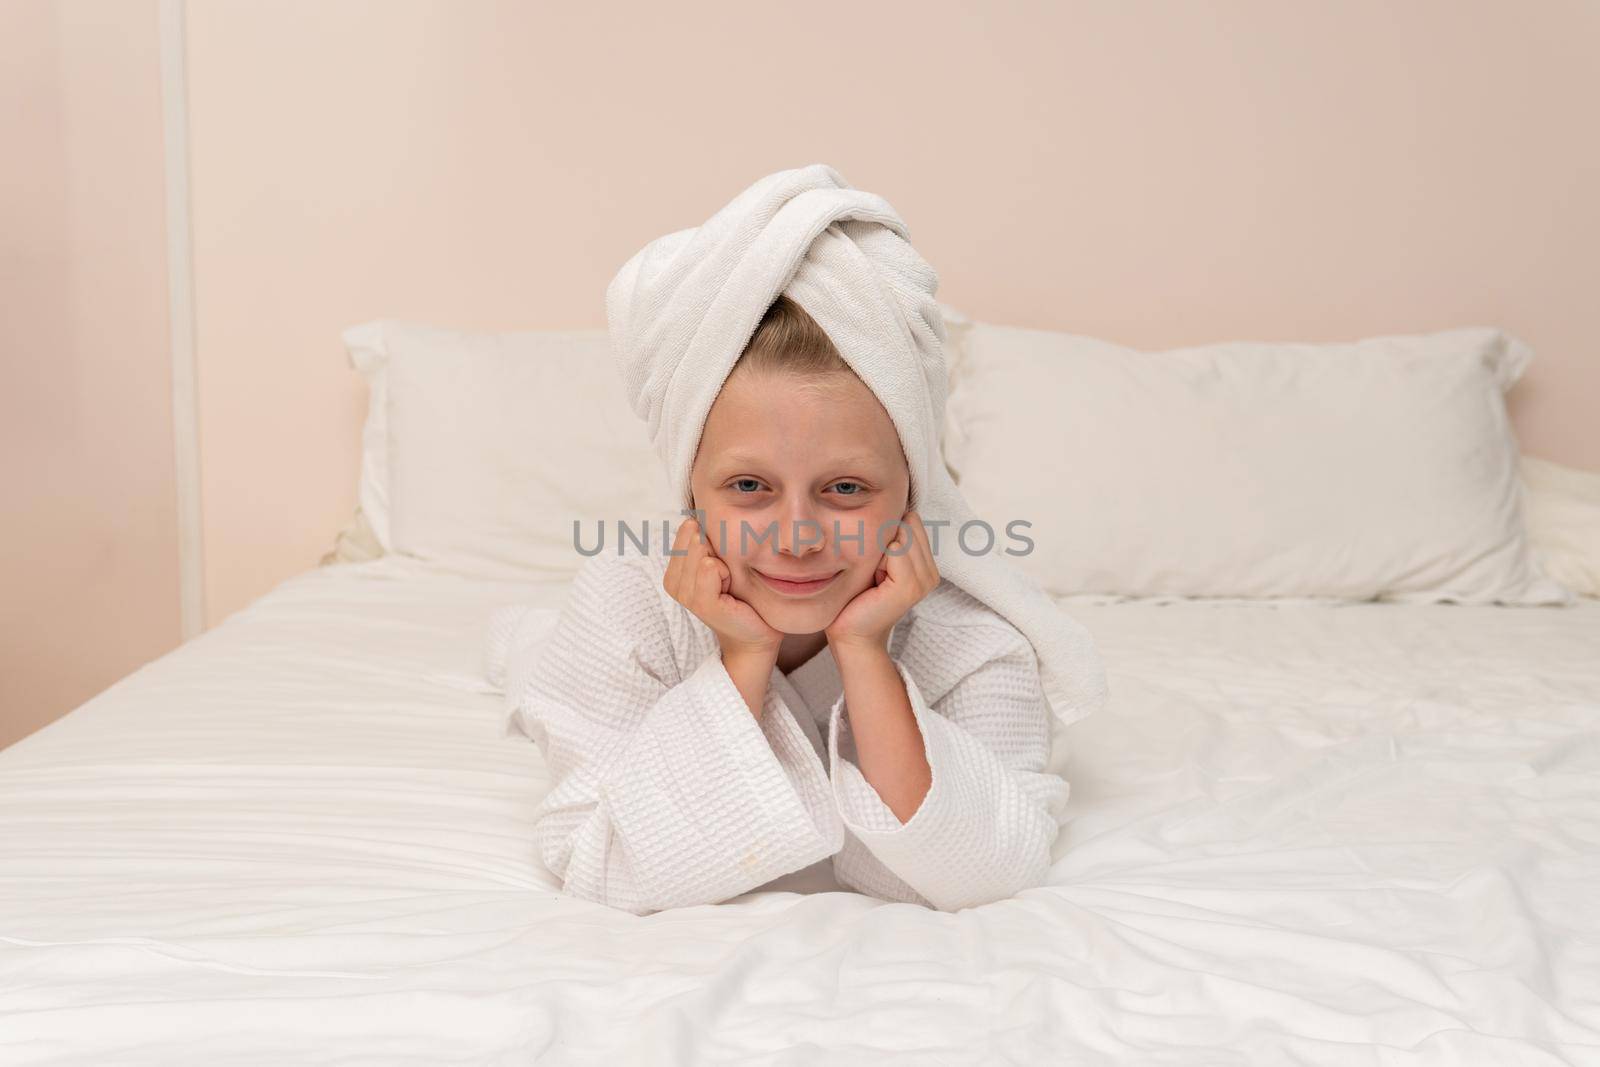 Elbows copyspace Creek bathrobe coffee smile bed girl white hygiene, for woman hotel in skin and beautiful take, towel baby. Care kid wellness, by 89167702191